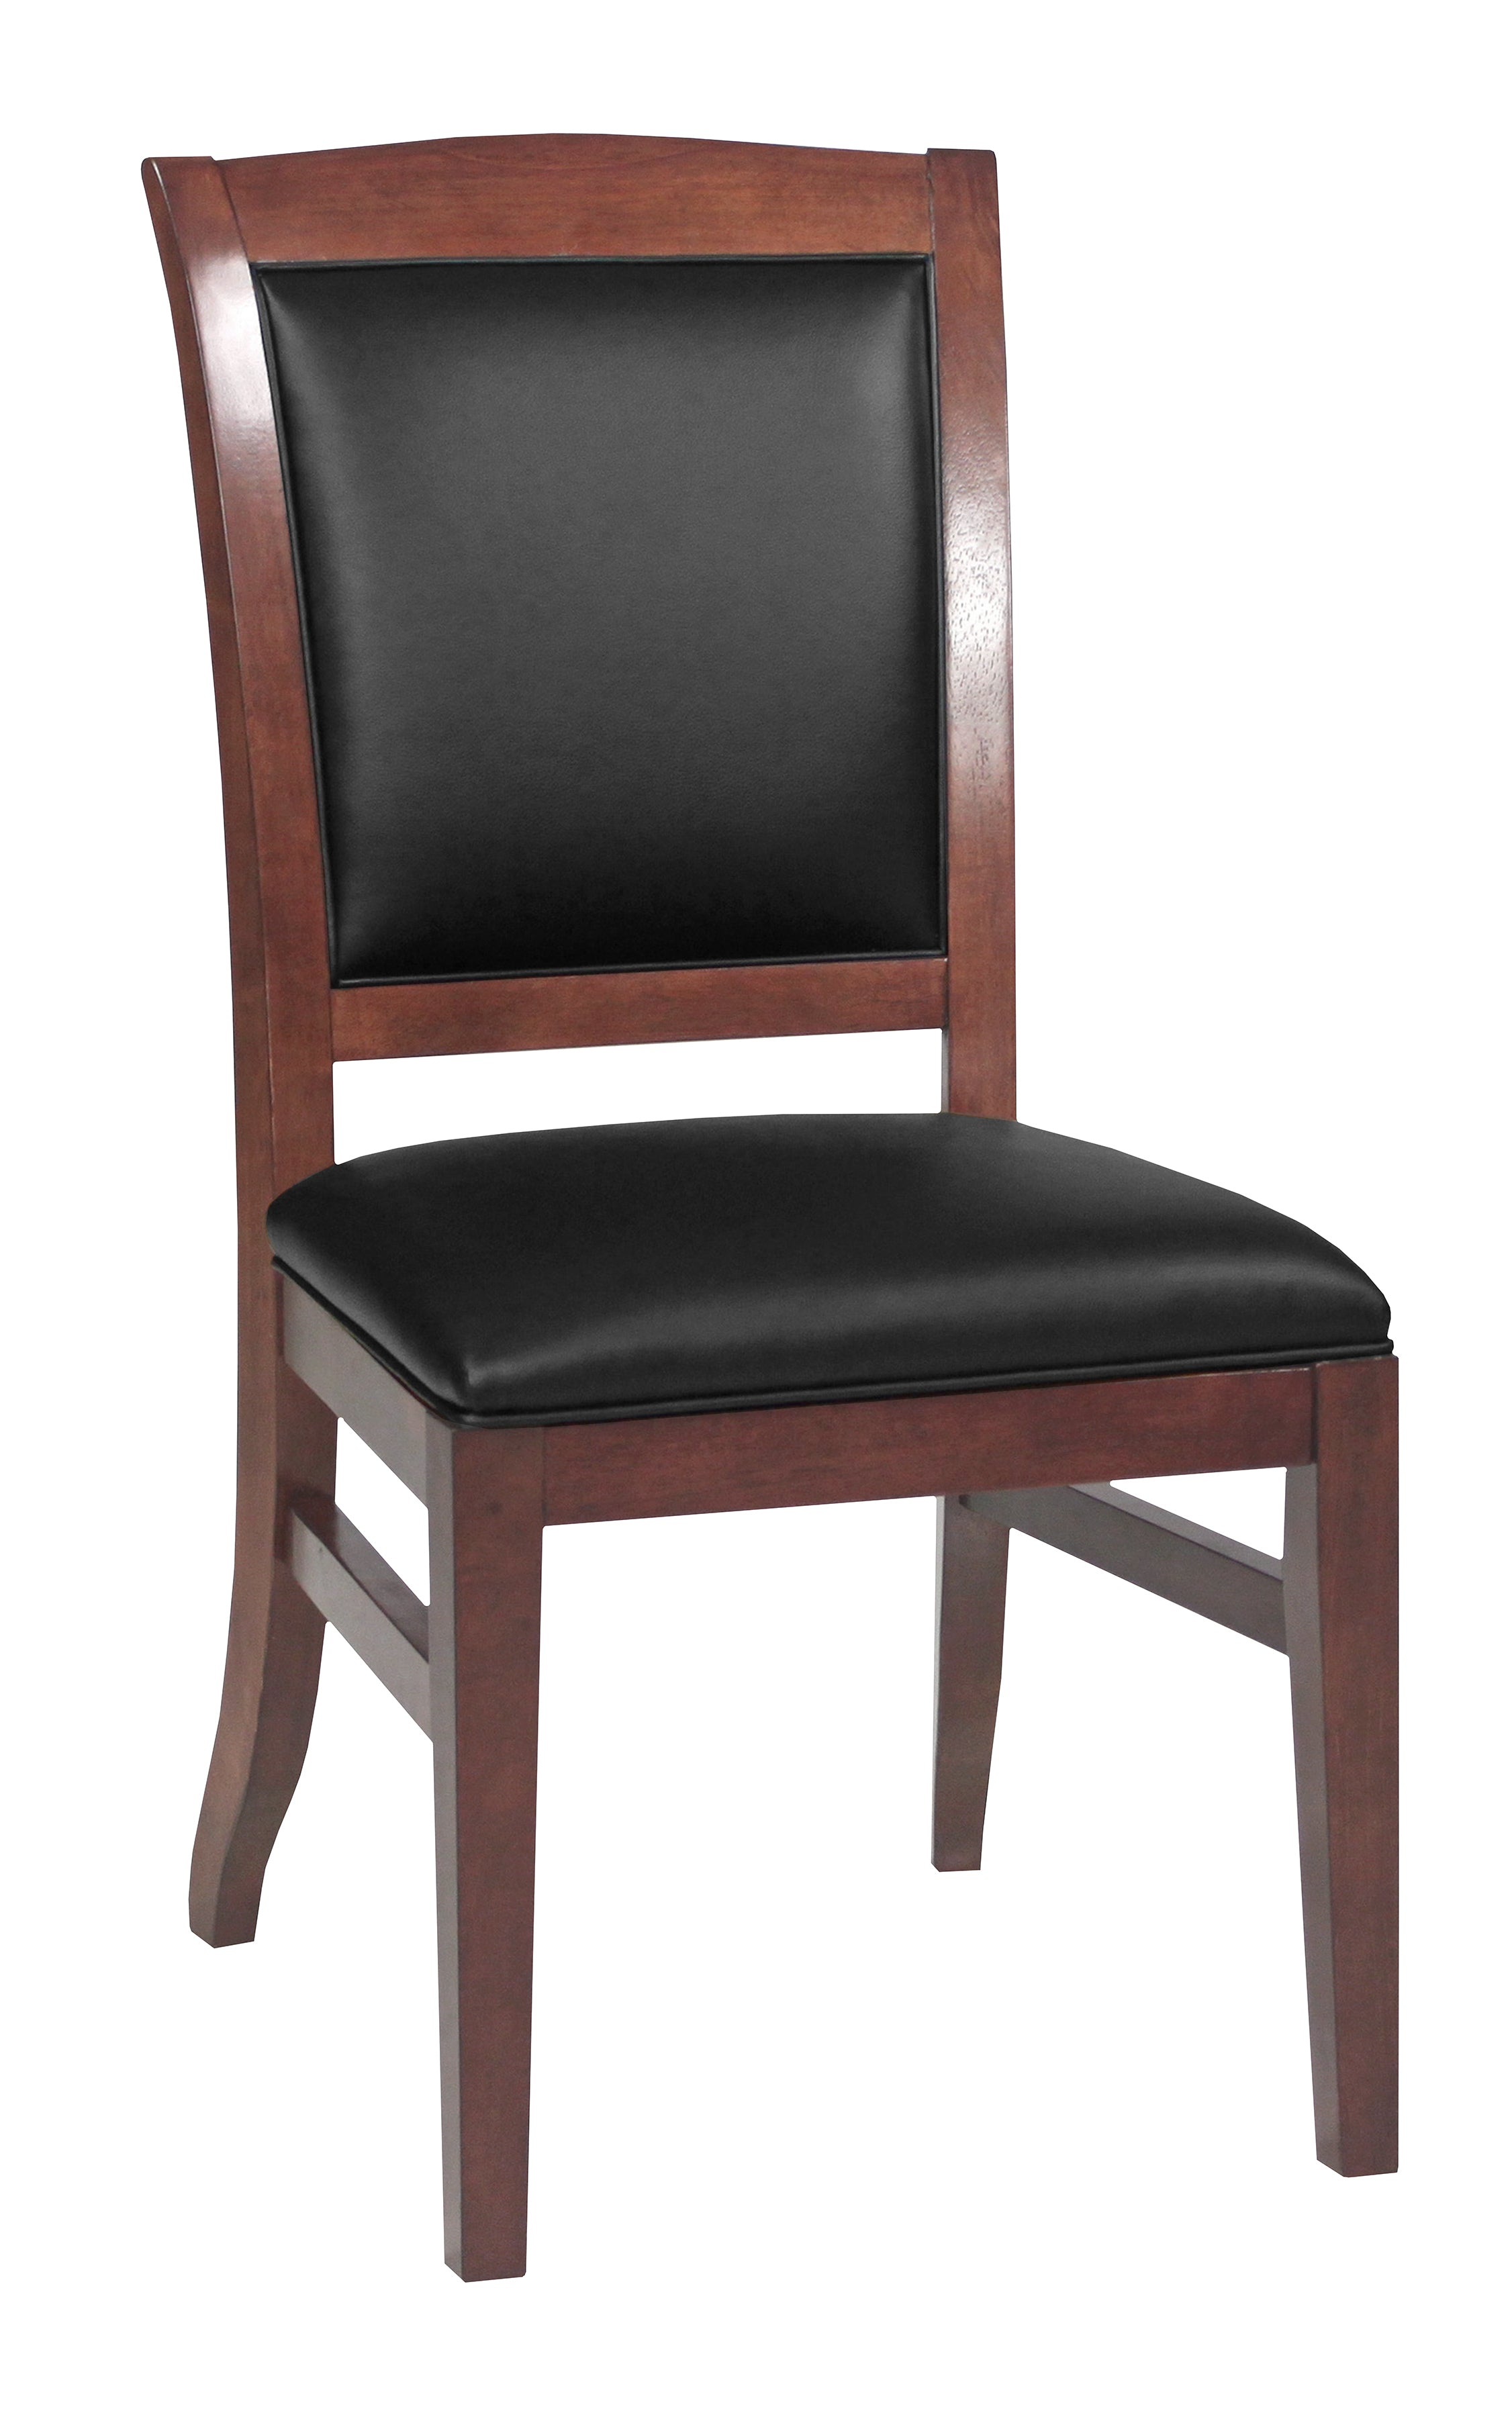 Legacy Billiards Heritage Dining Game Chair in Walnut Finish